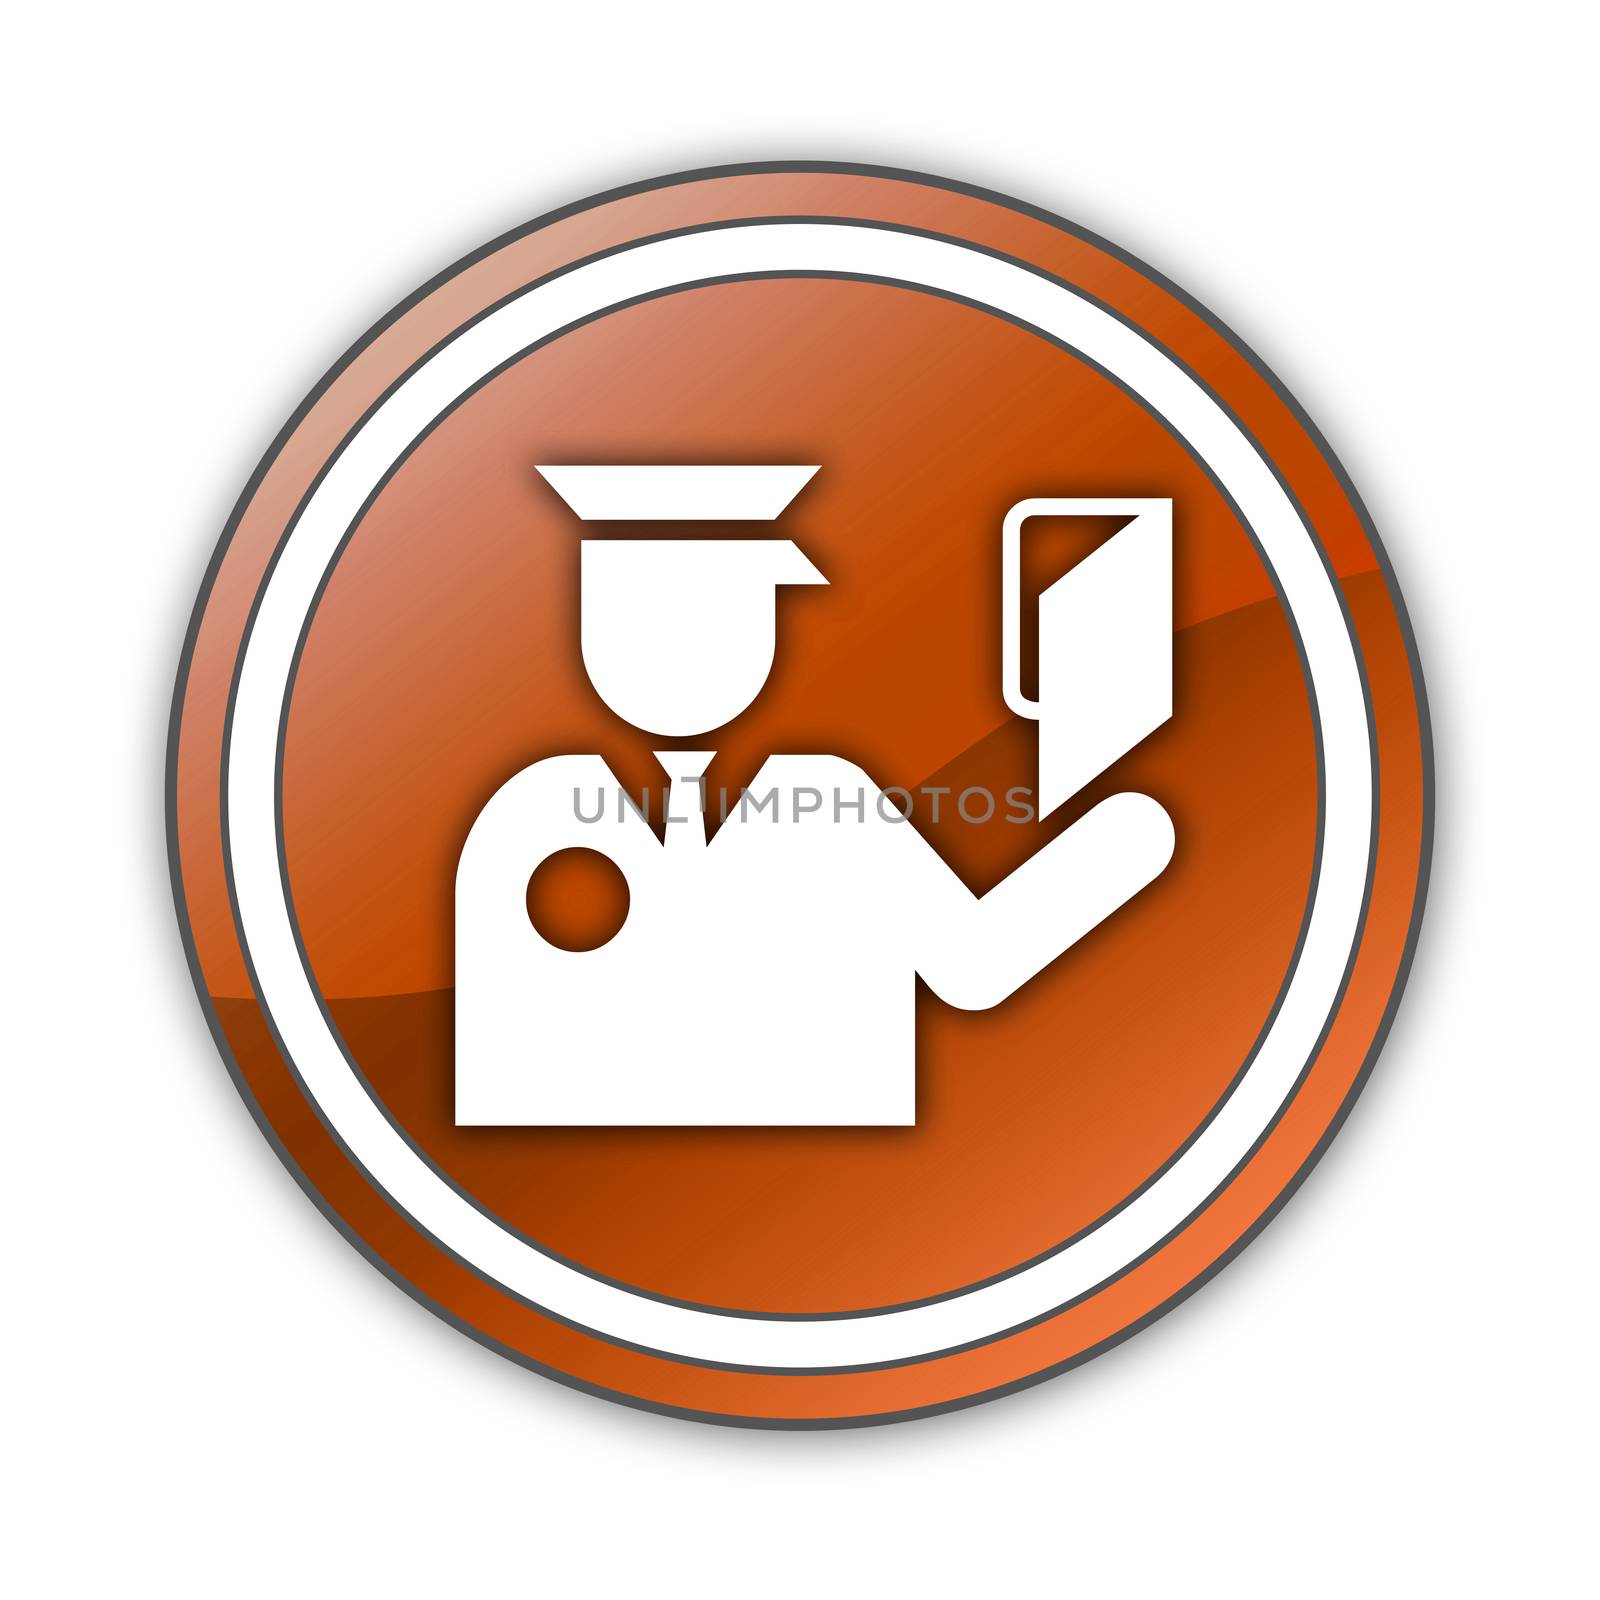 Icon, Button, Pictogram with Immigration symbol